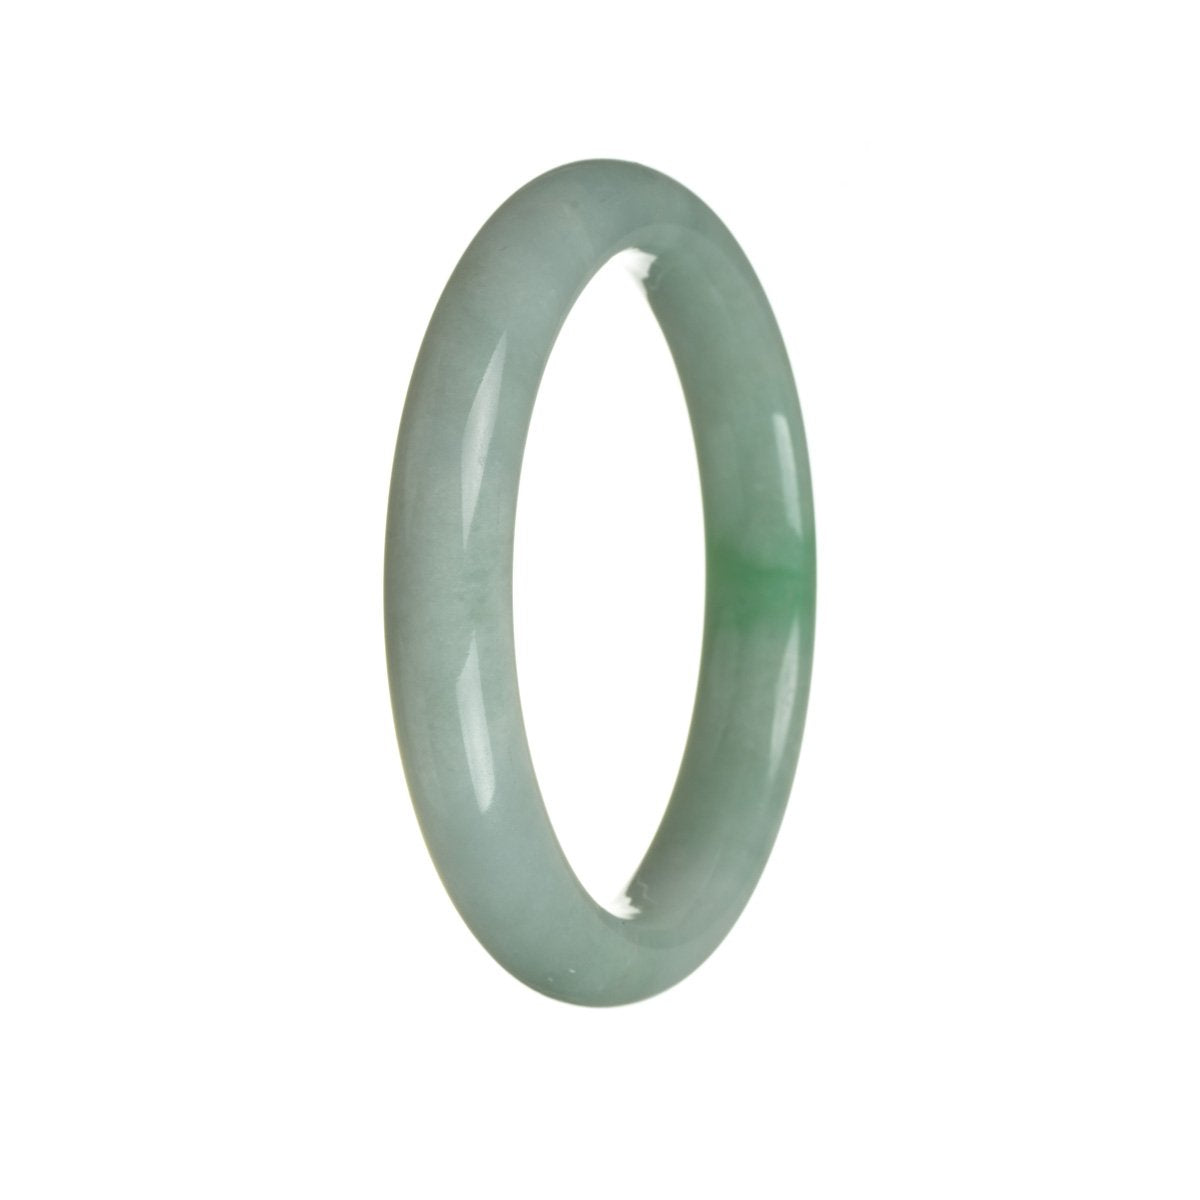 A close-up photo of a Real Grade A Green Jade Bracelet, featuring a 62mm Half Moon design. The bracelet is beautifully crafted and displays a vibrant shade of green. The smooth and polished jade stones are arranged in a half-moon shape, creating an elegant and timeless piece of jewelry.